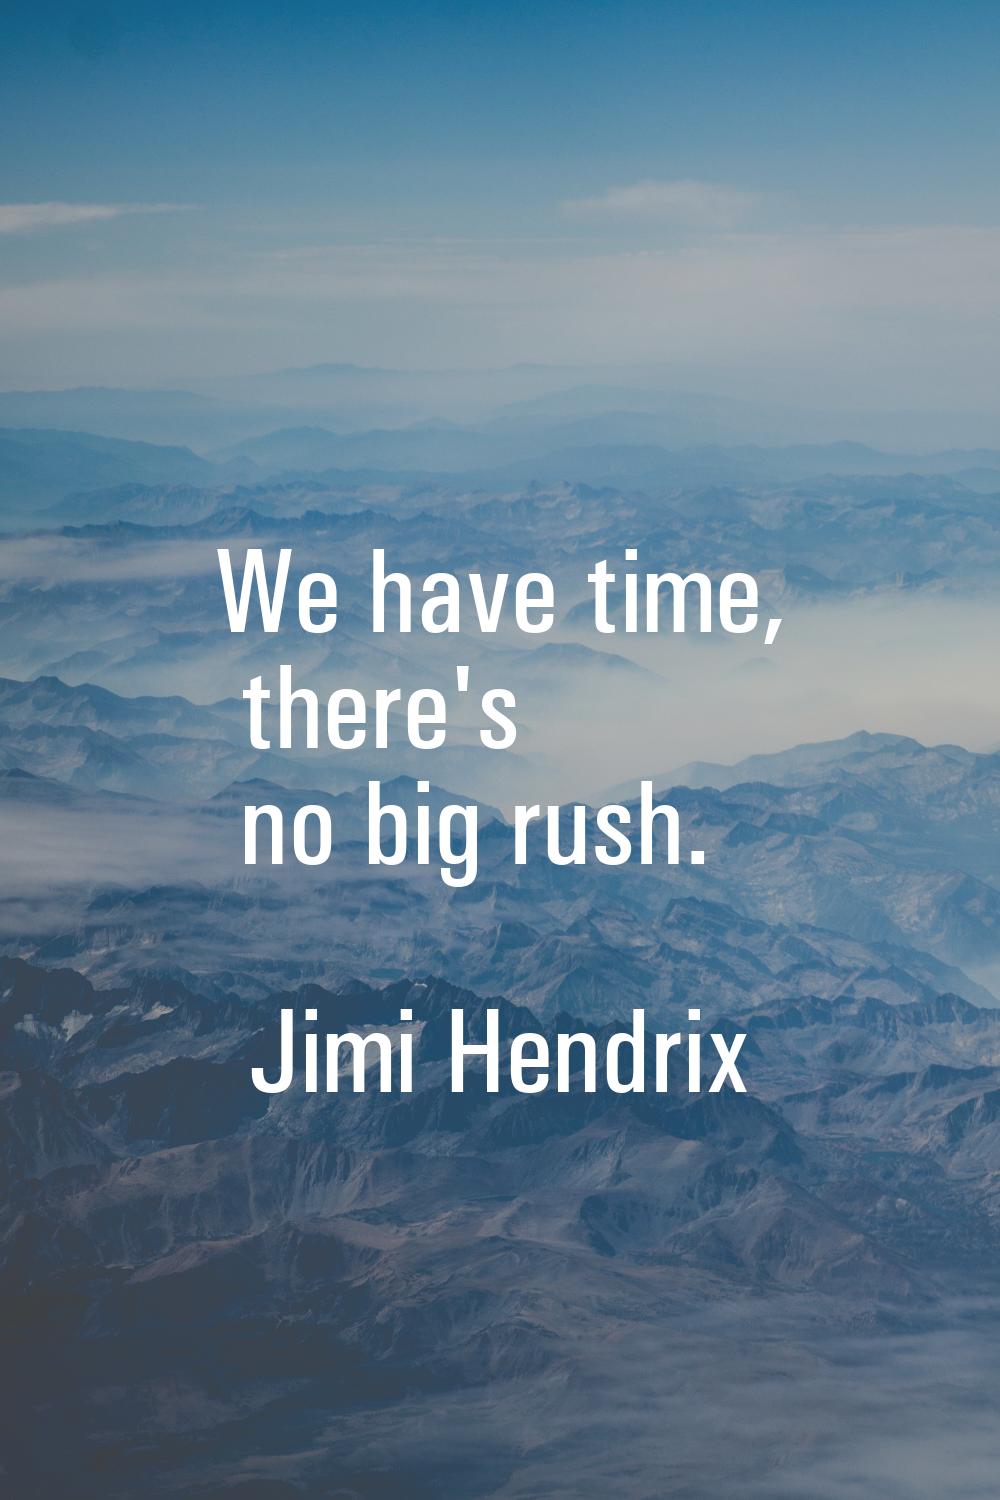 We have time, there's no big rush.